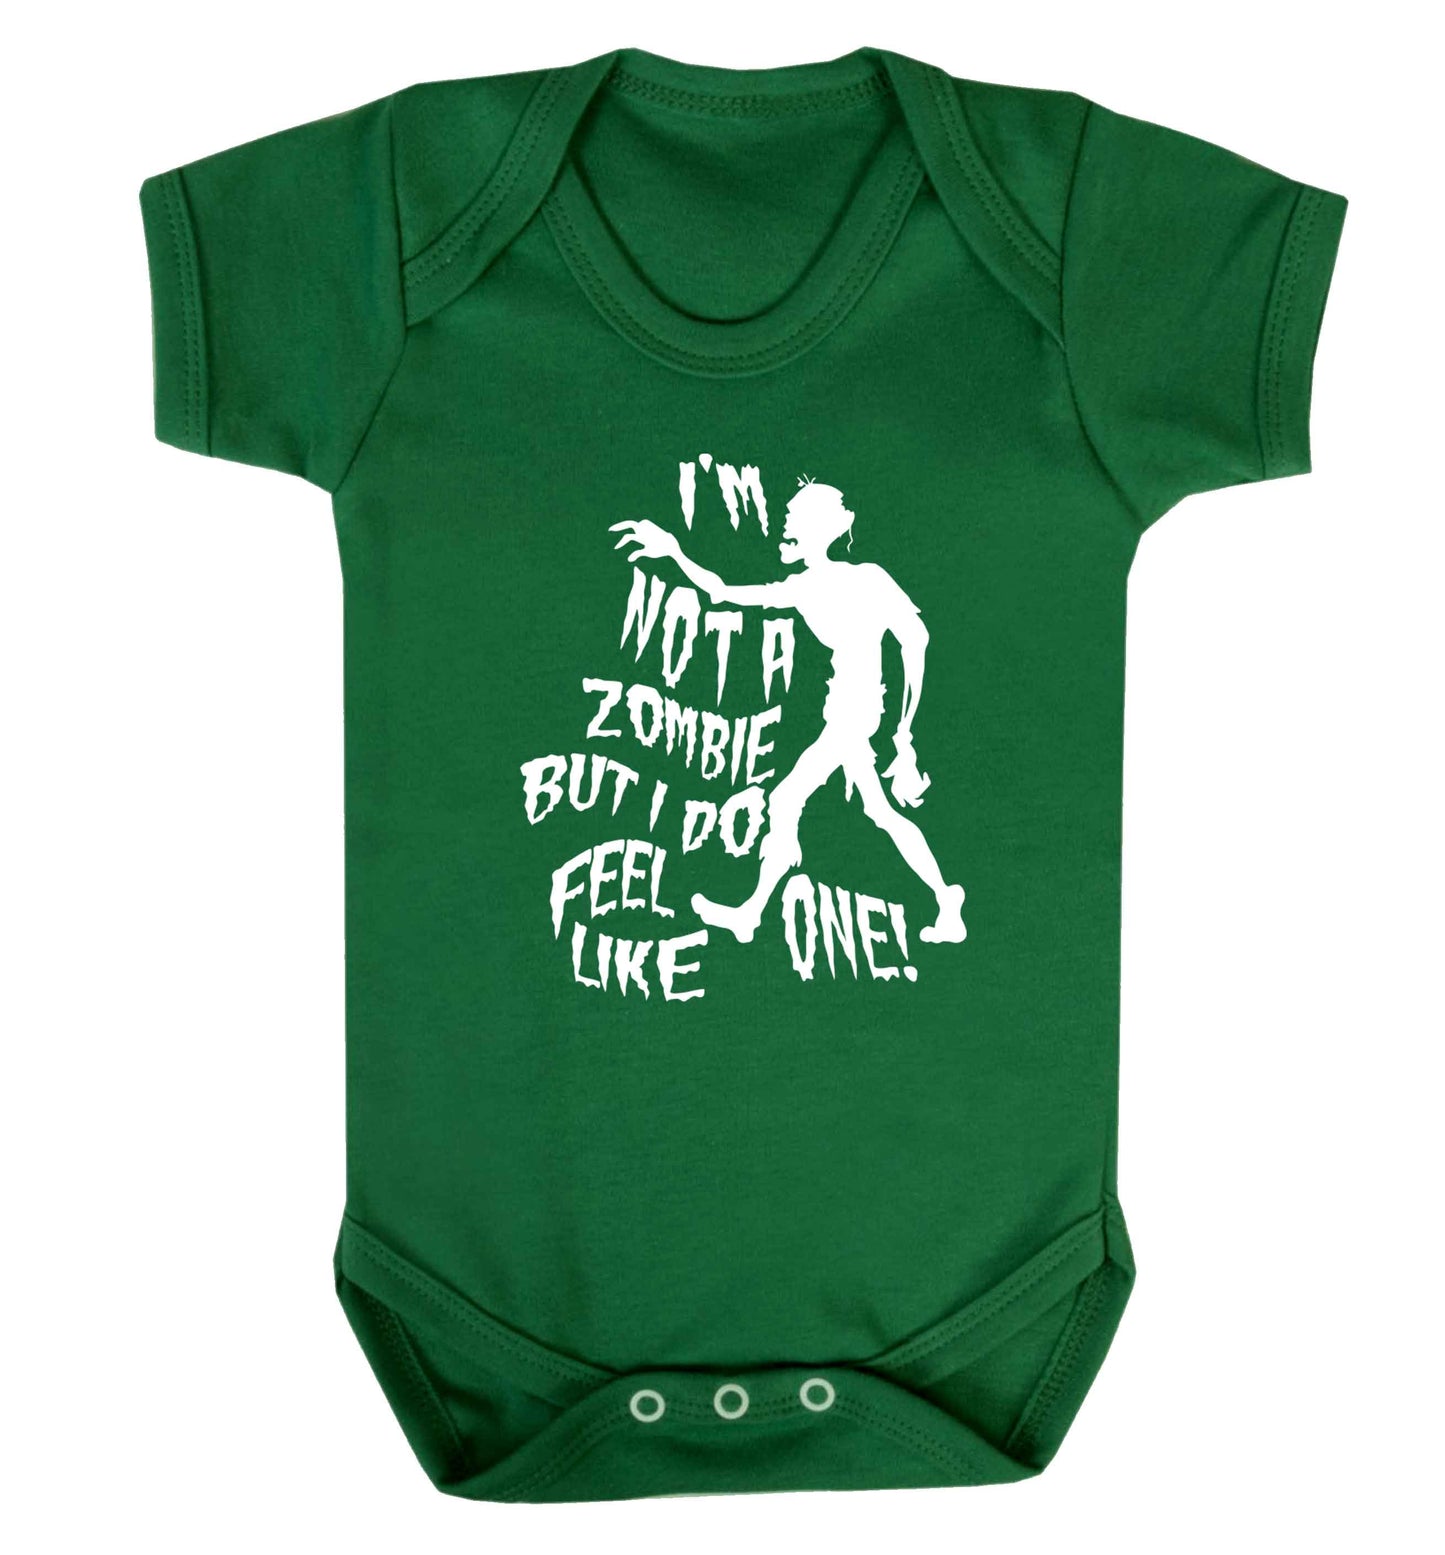 I'm not a zombie but I do feel like one! Baby Vest green 18-24 months